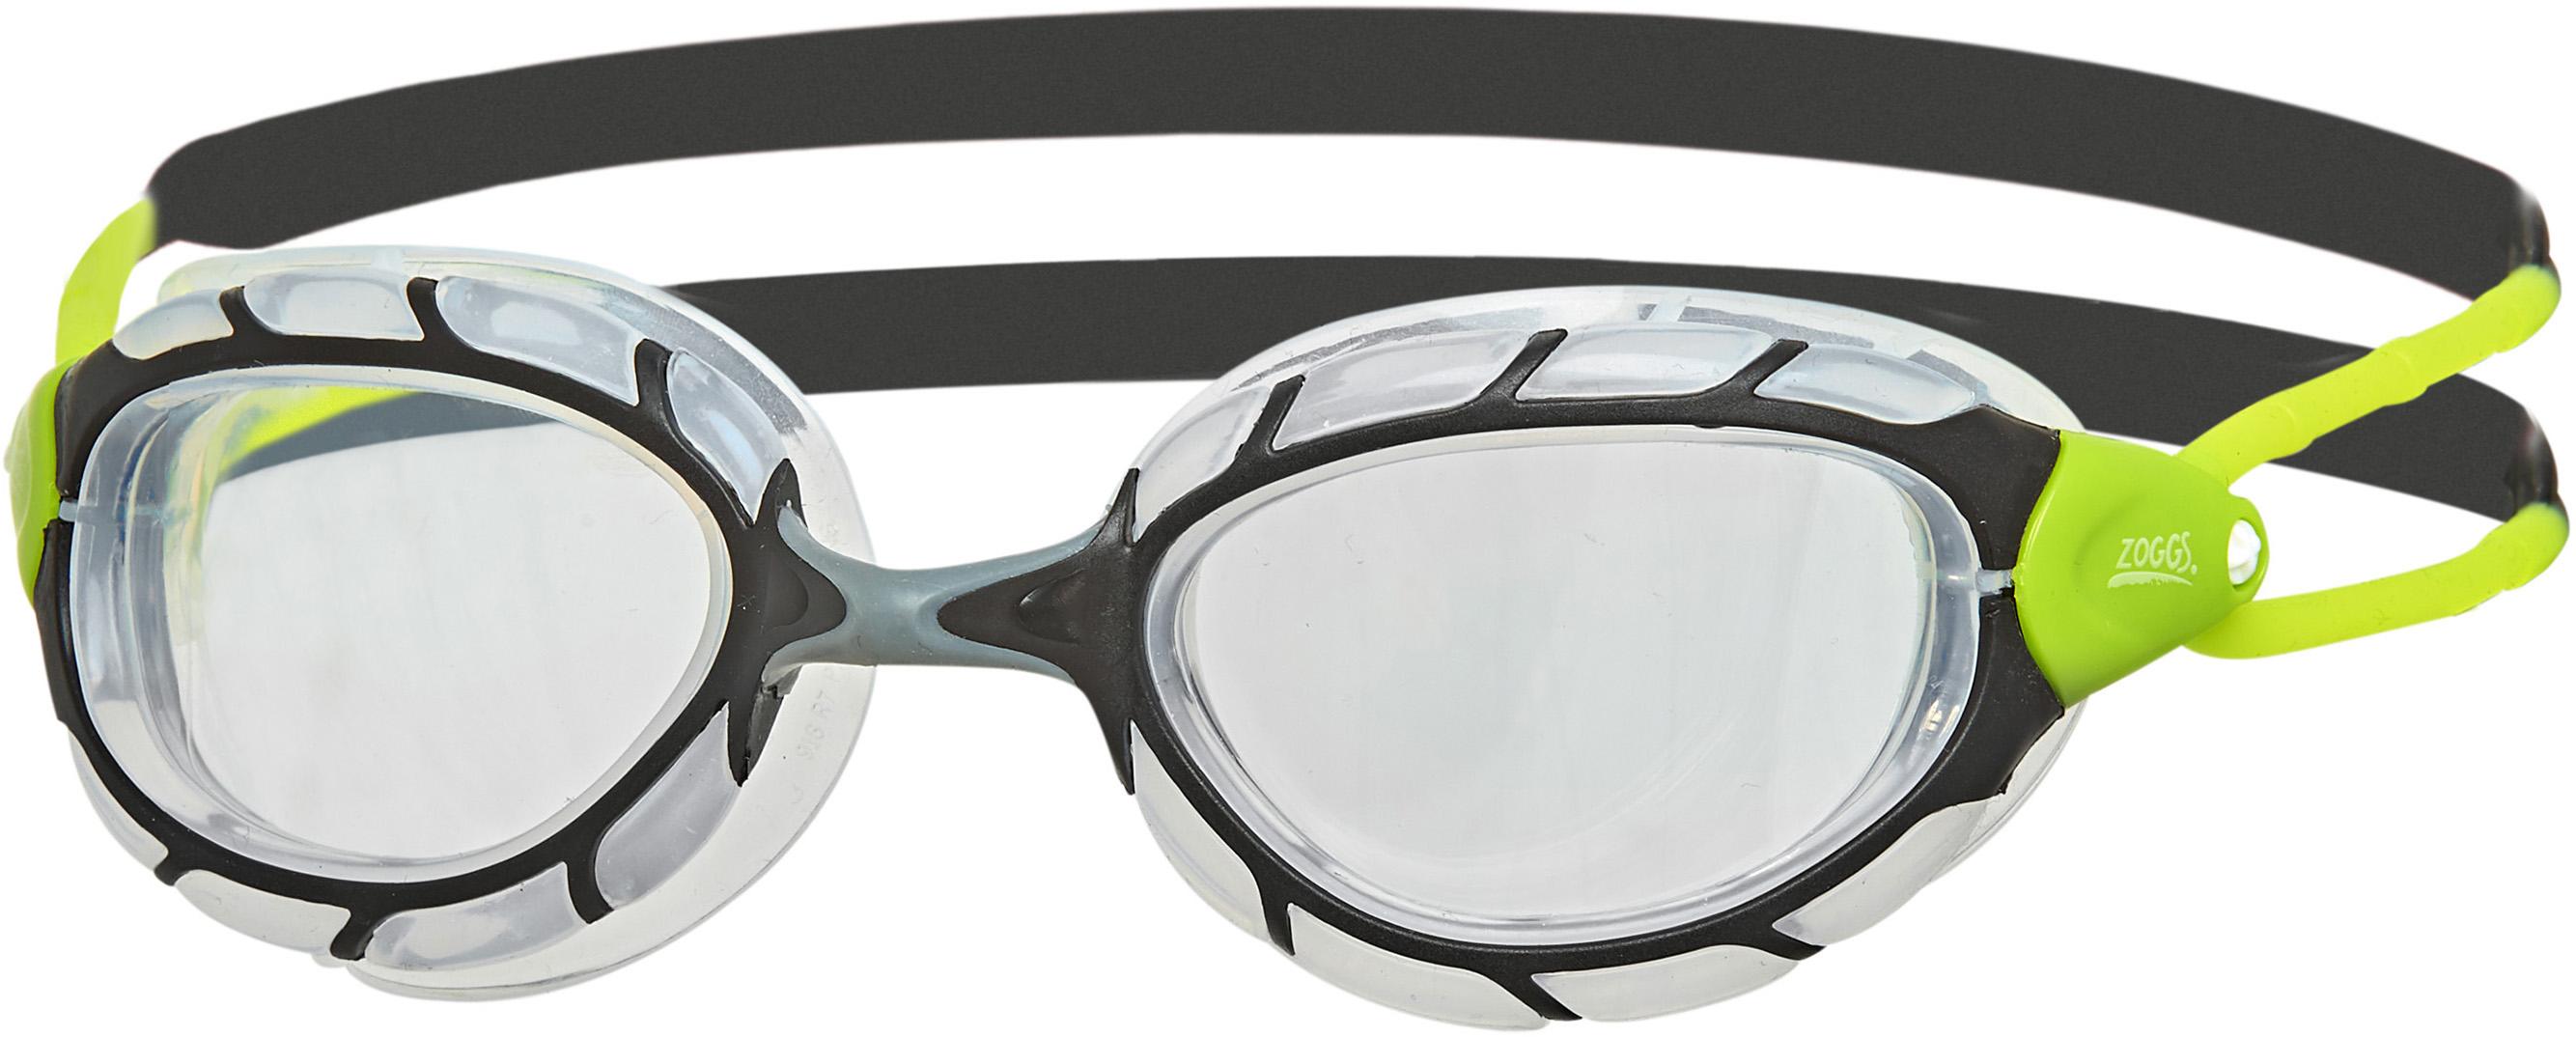 Zoggs Predator Goggle (clear Lens) - Clear/black/lime